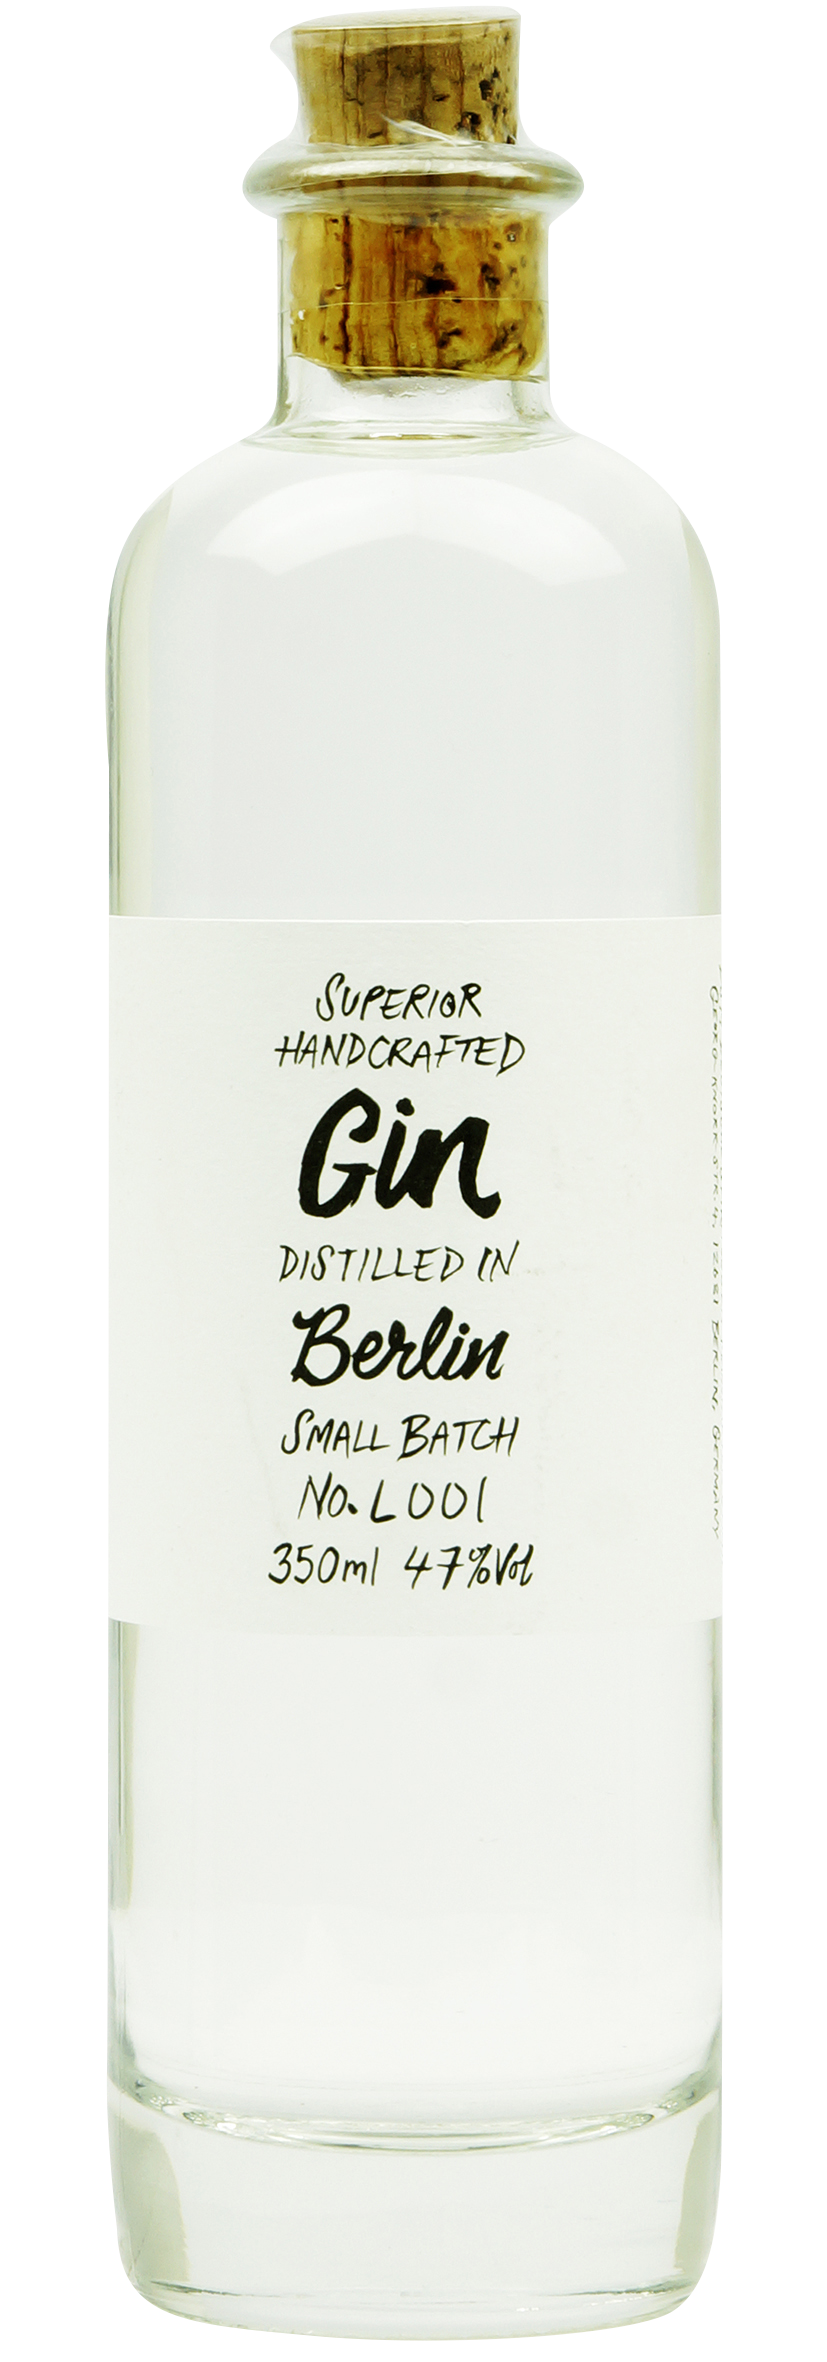 Superior Handcrafted Gin 0